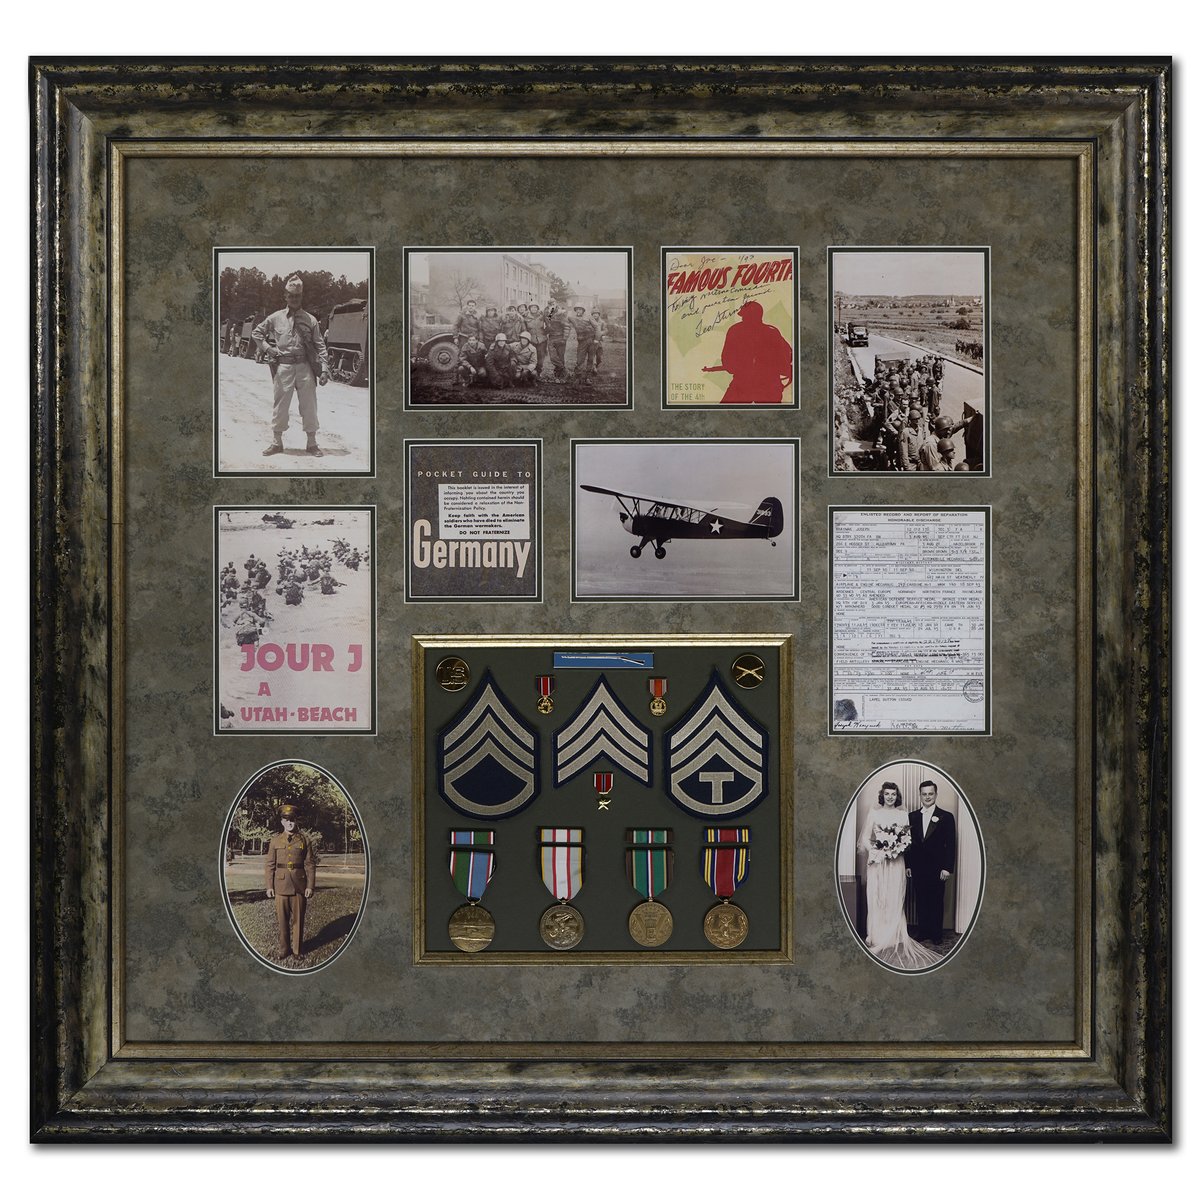 We'll help you frame a collage of a life's memories & treasures. Collages make for a deeply personal finished piece to enjoy for generations to come.

#northpennart #custompictureframing #military #militaryveterans #familyhistory #collectibles #montgomerycounty #buckscountypa